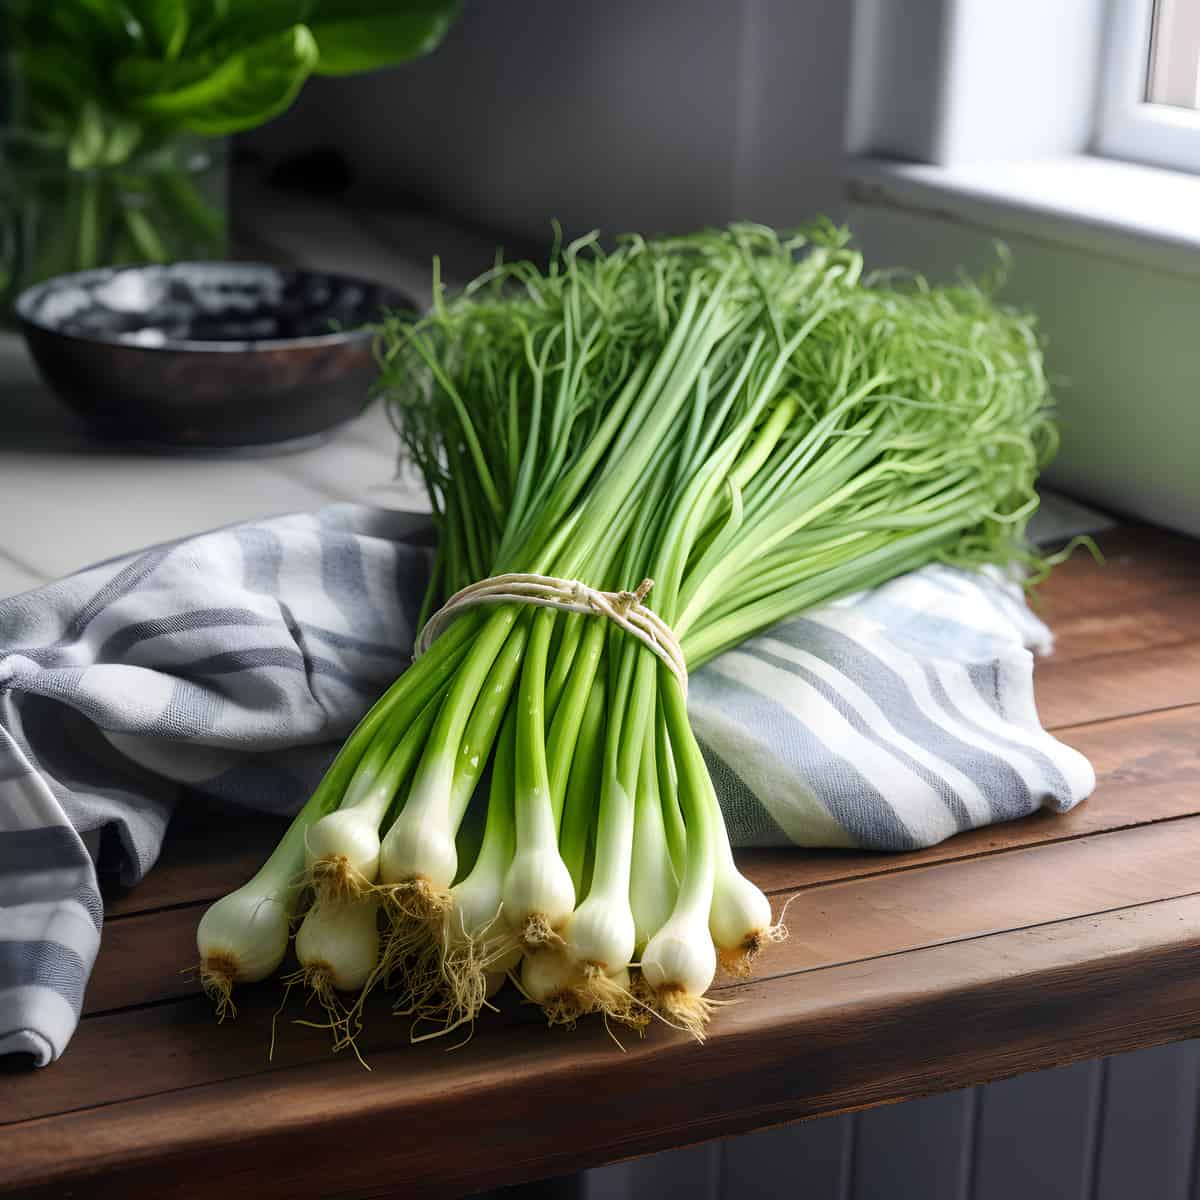 Welsh Onion Greens on a kitchen counter